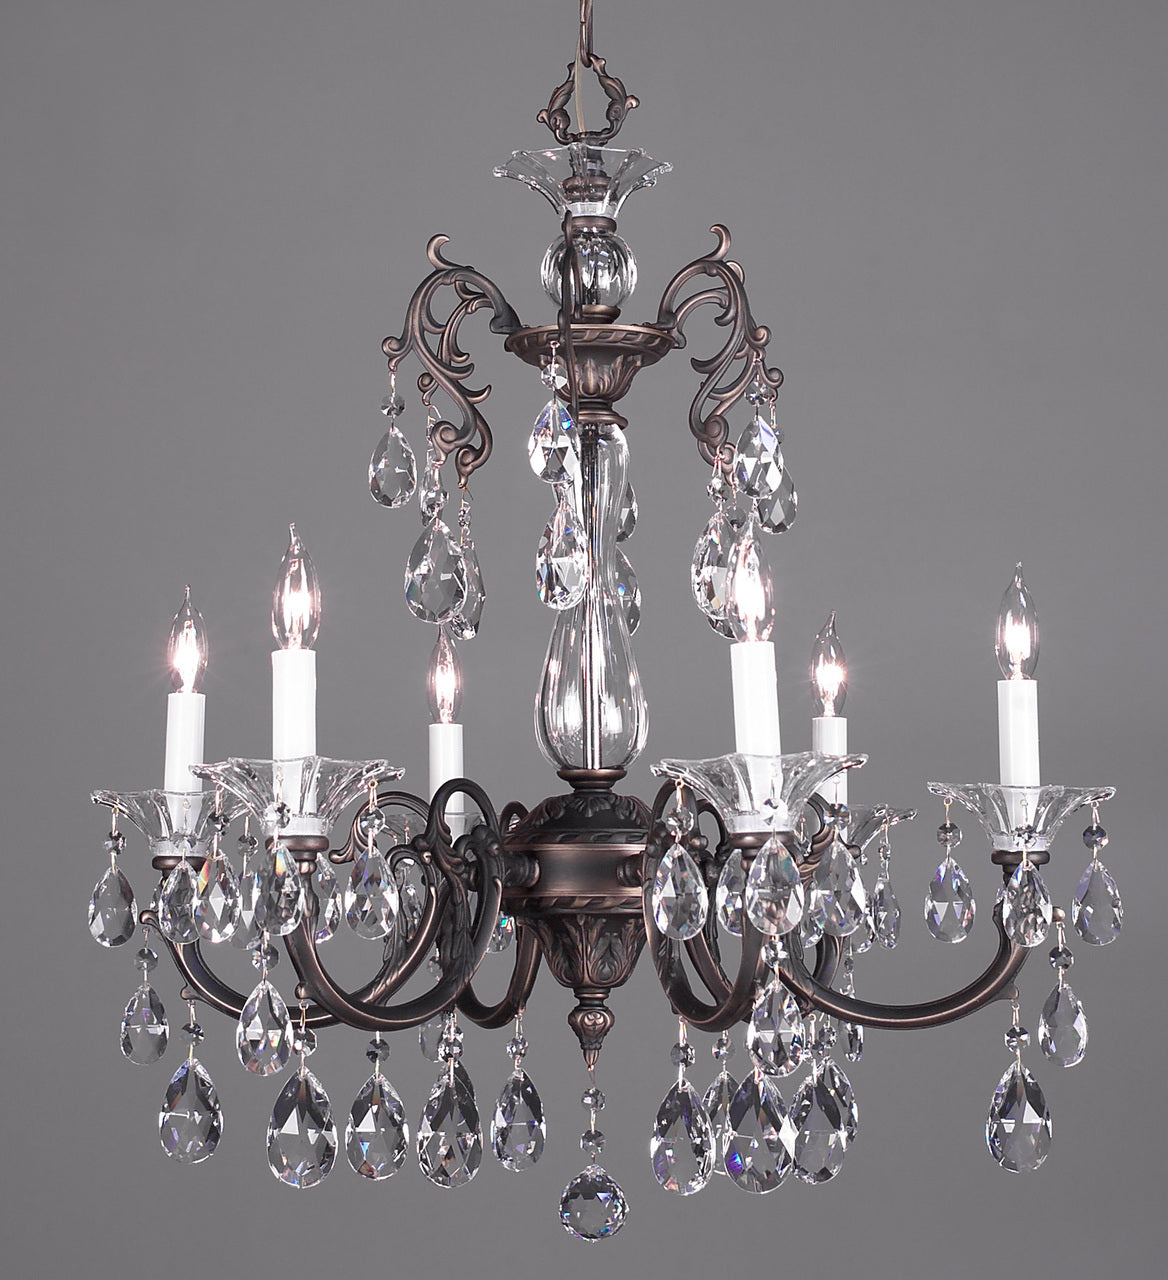 Classic Lighting 57056 RB SC Via Lombardi Crystal Chandelier in Roman Bronze (Imported from Spain)